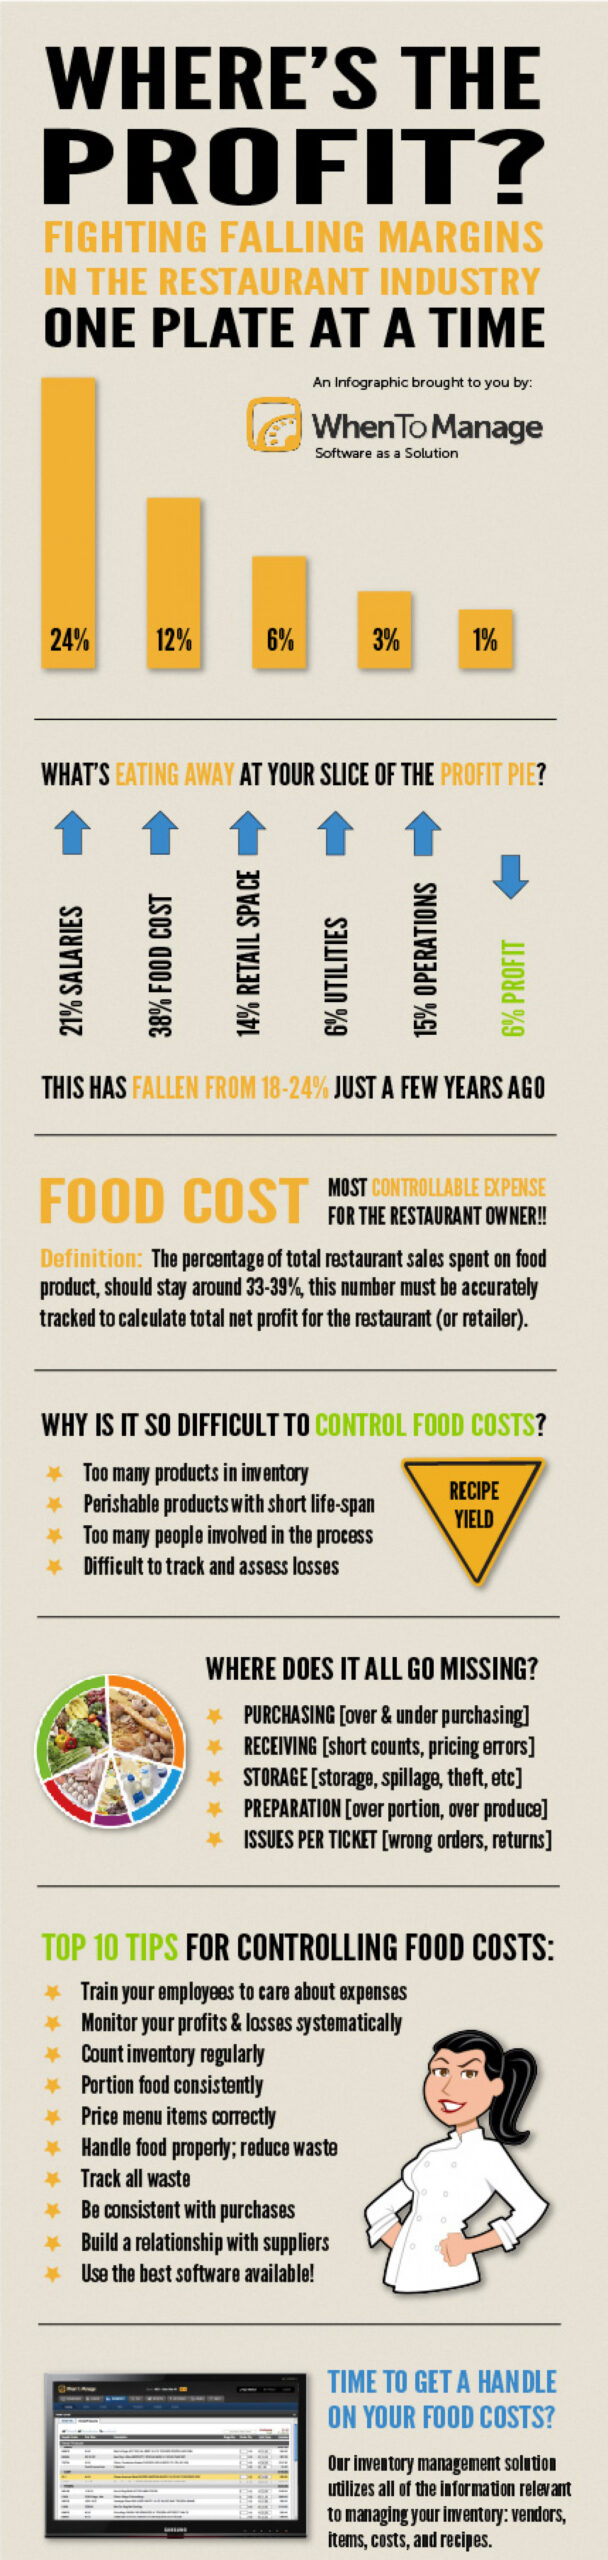 The Cost (and Opportunity) of Product Bugs [Infographic]